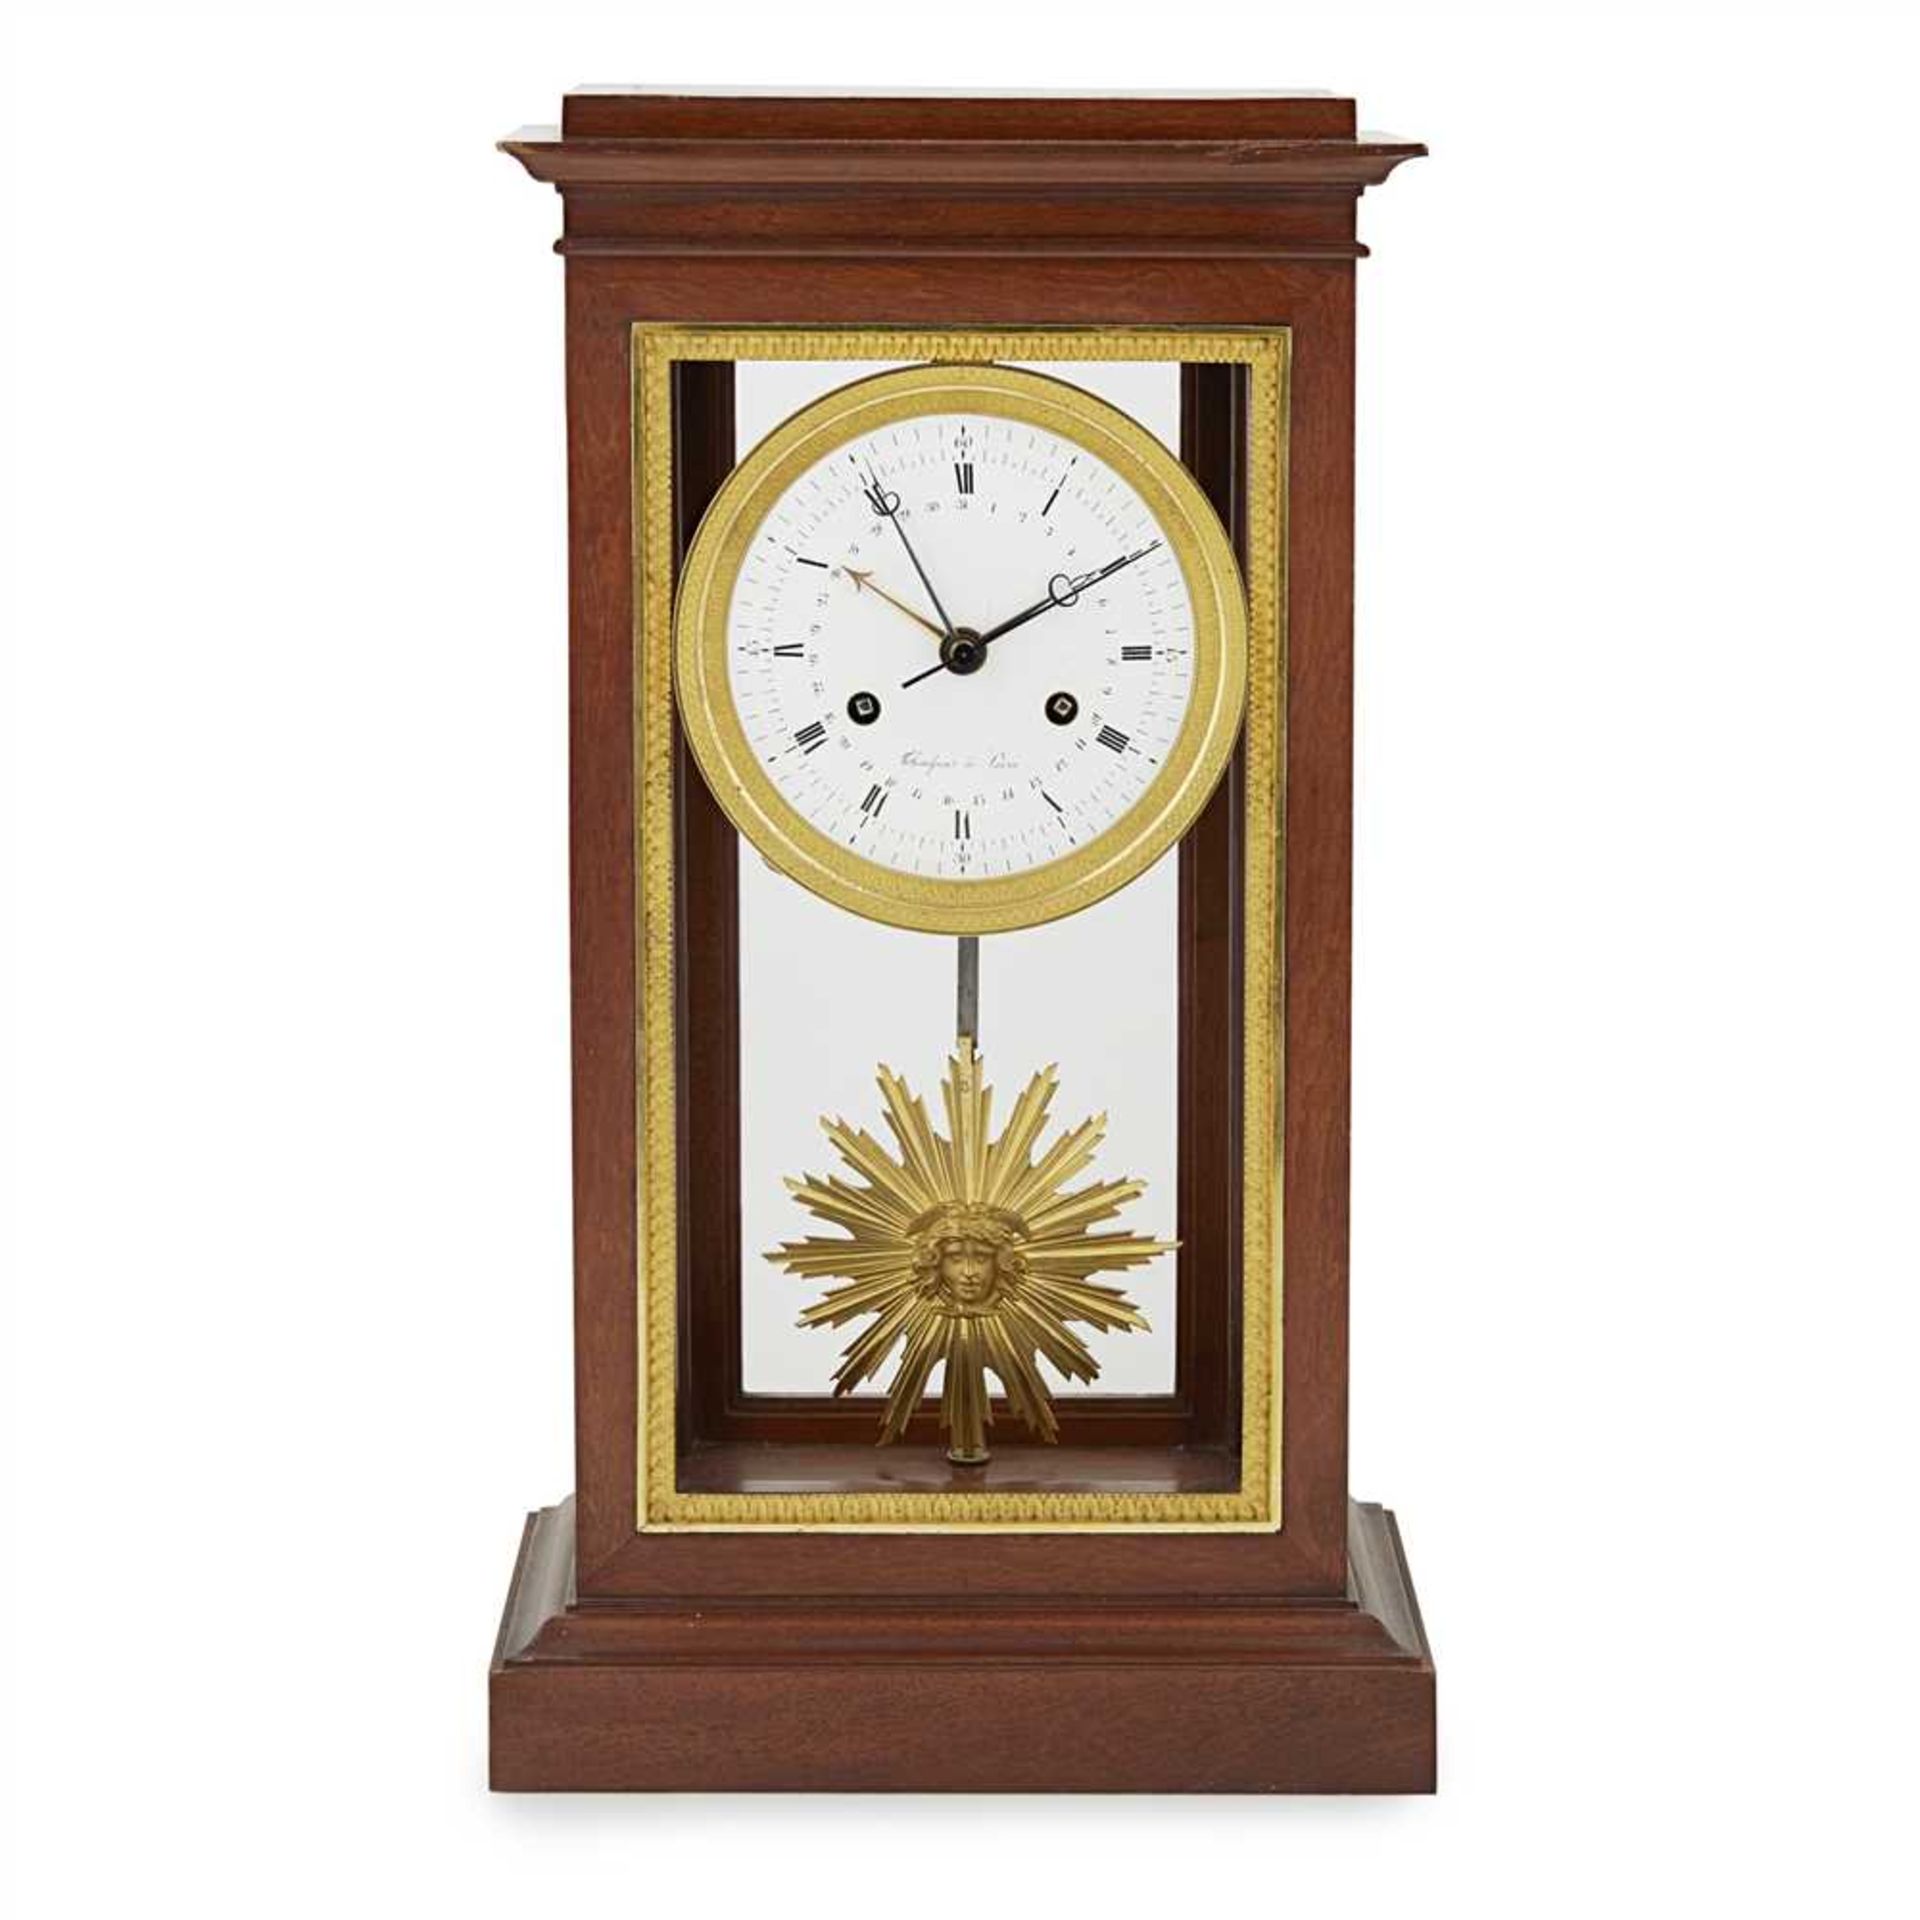 FRENCH EMPIRE MAHOGANY AND GILT METAL PORTICO CLOCK, THONISSEN, PARIS EARLY 19TH CENTURY